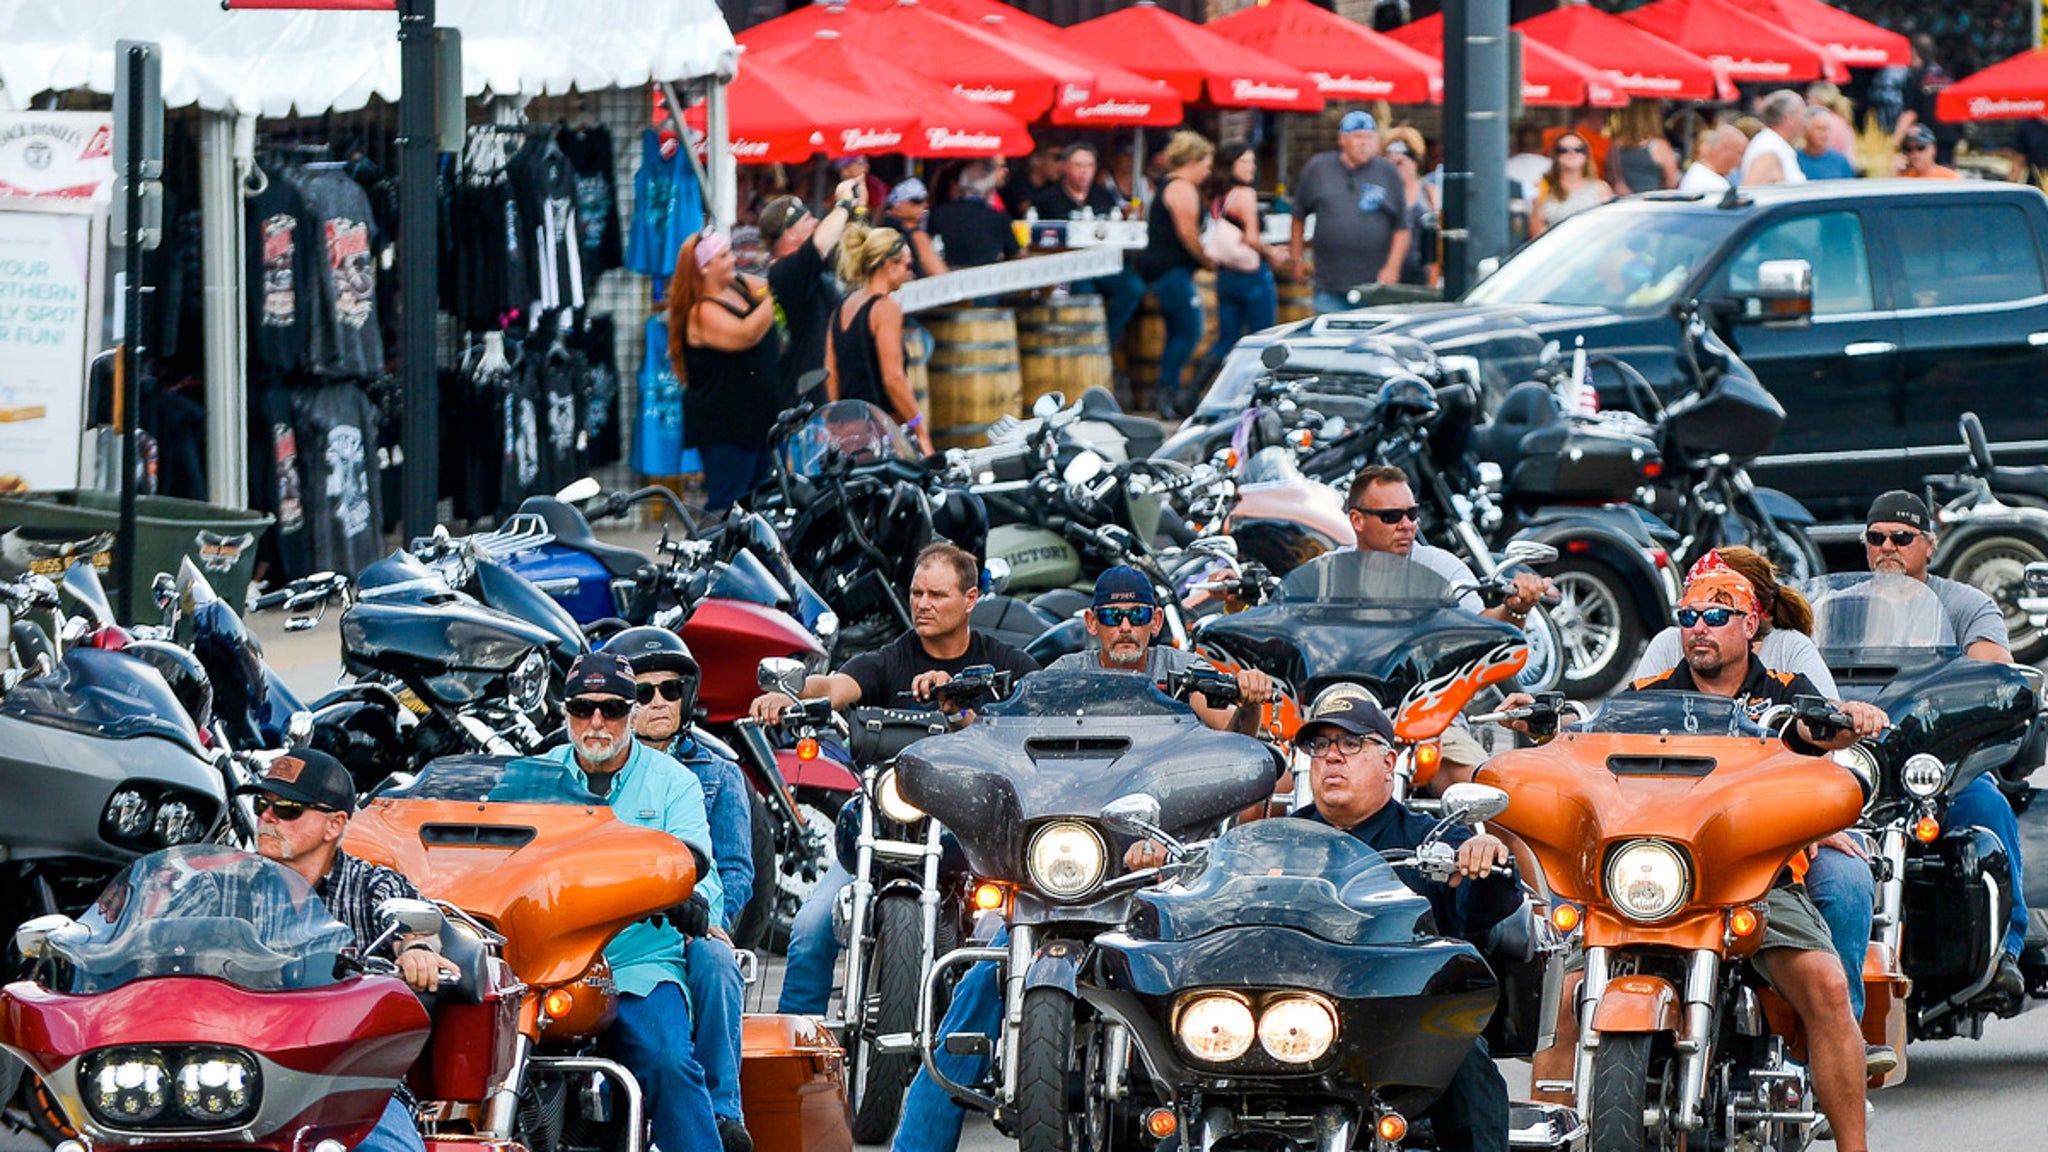 Sturgis Motorcyle Rally Bikers Arrive by Thousands, Masks and